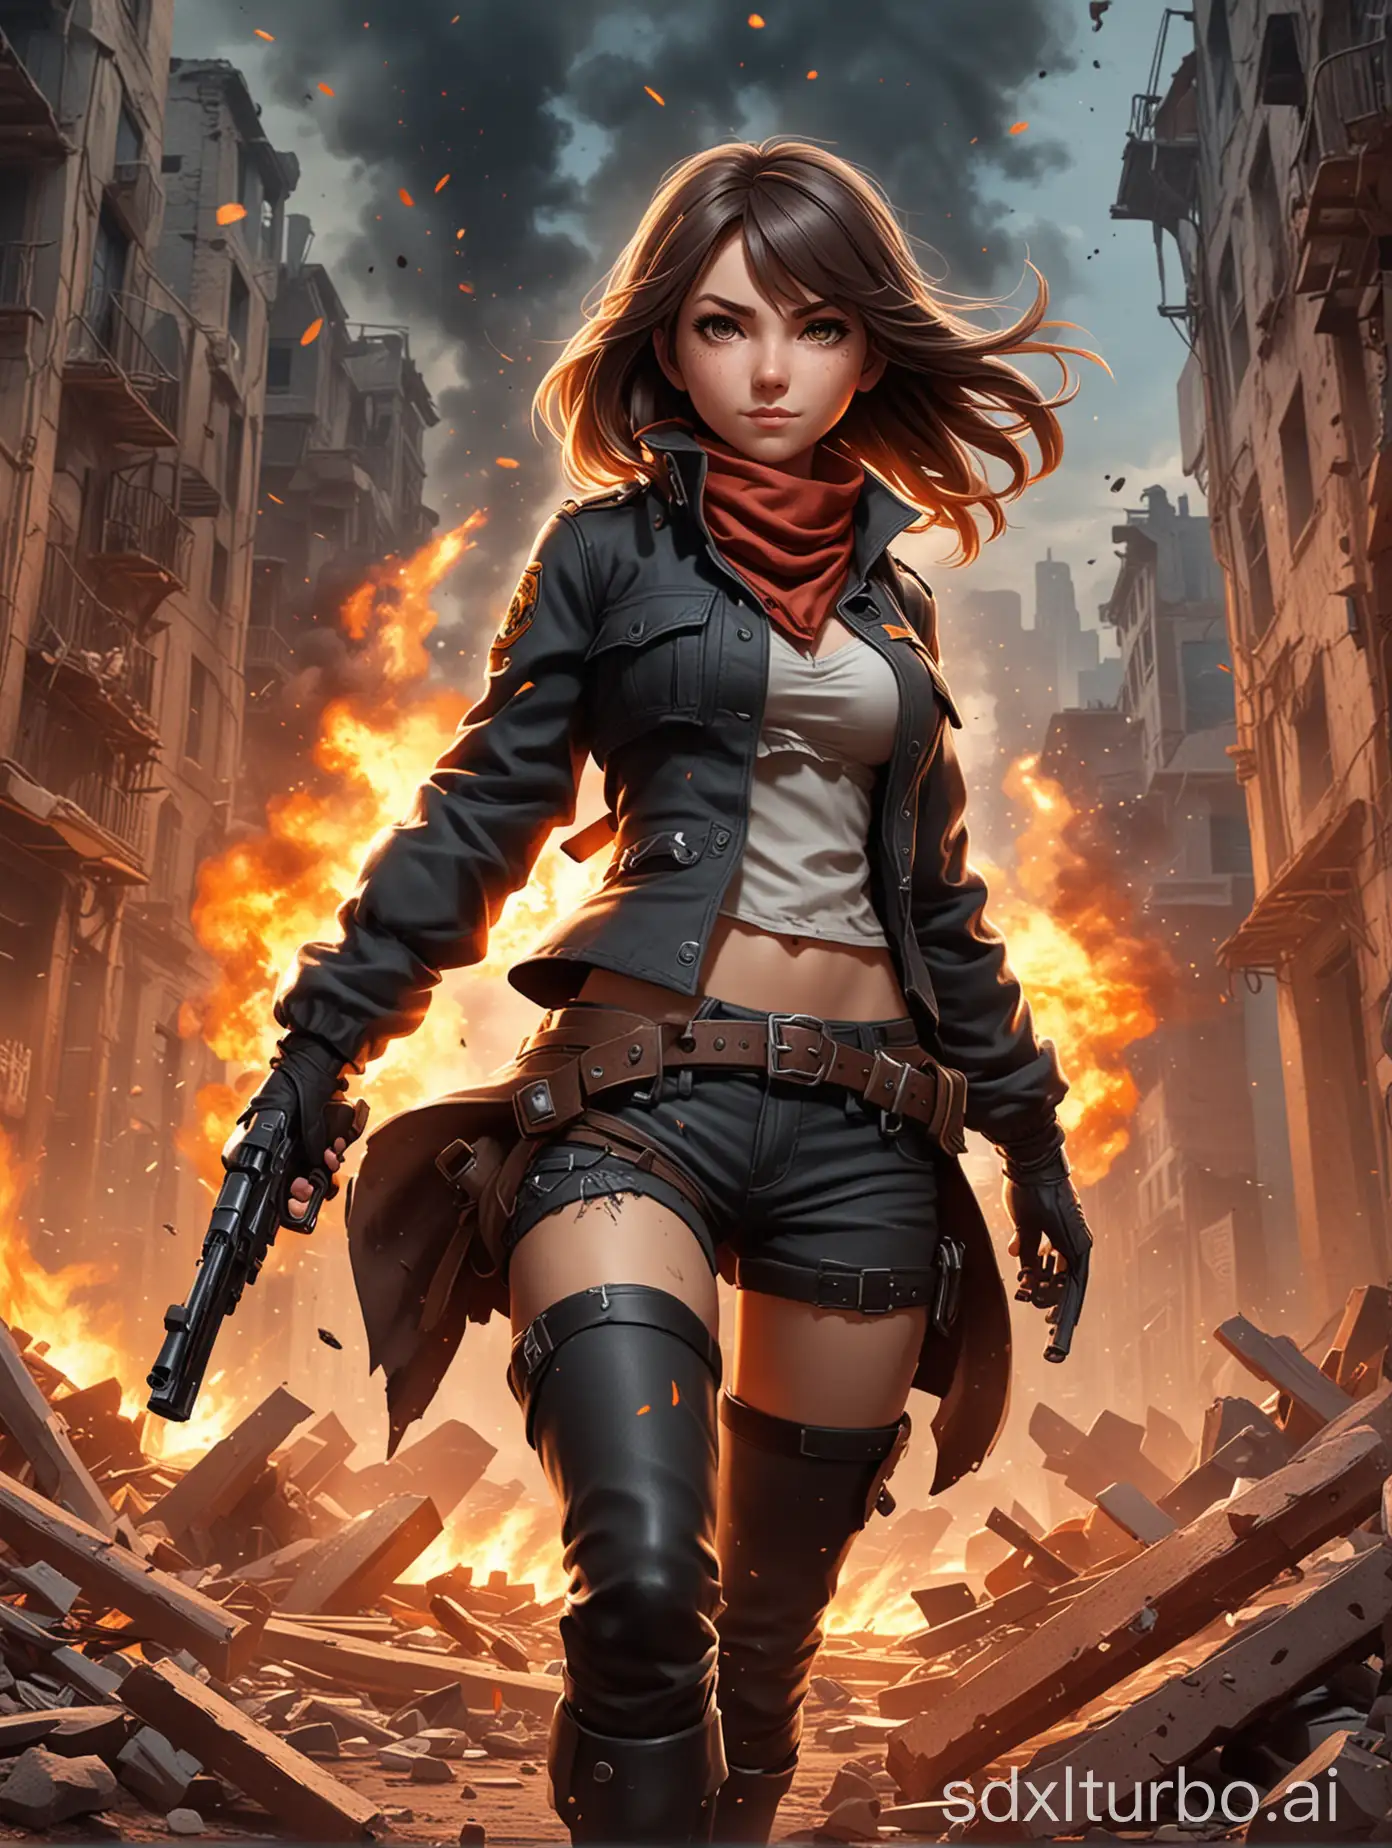 Create a battle action game style poster that showcases a cute anime girl Gunslinger with a dynamic full body rendering. Her revolver fires and she flies through the fiery rubble.